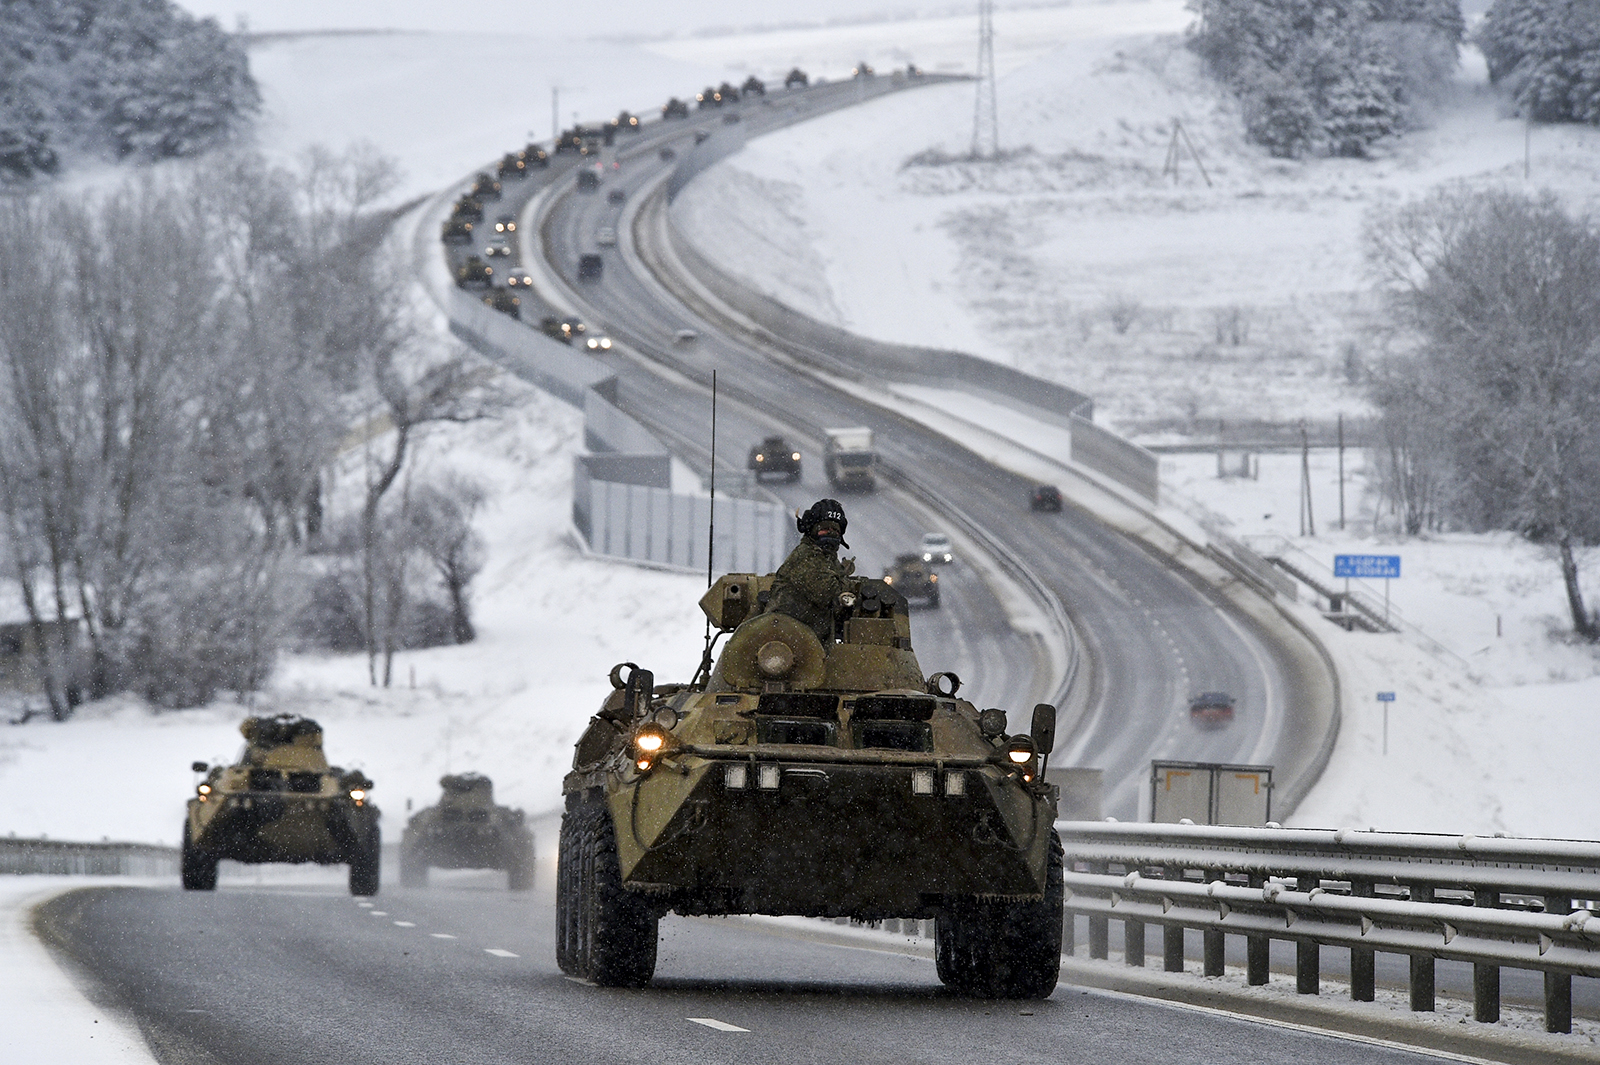 A convoy of Russian armored vehicles moves along a highway in Crimea, Tuesday, Jan. 18, 2022. Russia has concentrated more than 100,000 troops with tanks and other heavy weapons near Ukraine in what the West fears could be a prelude to an invasion. (AP Photo)